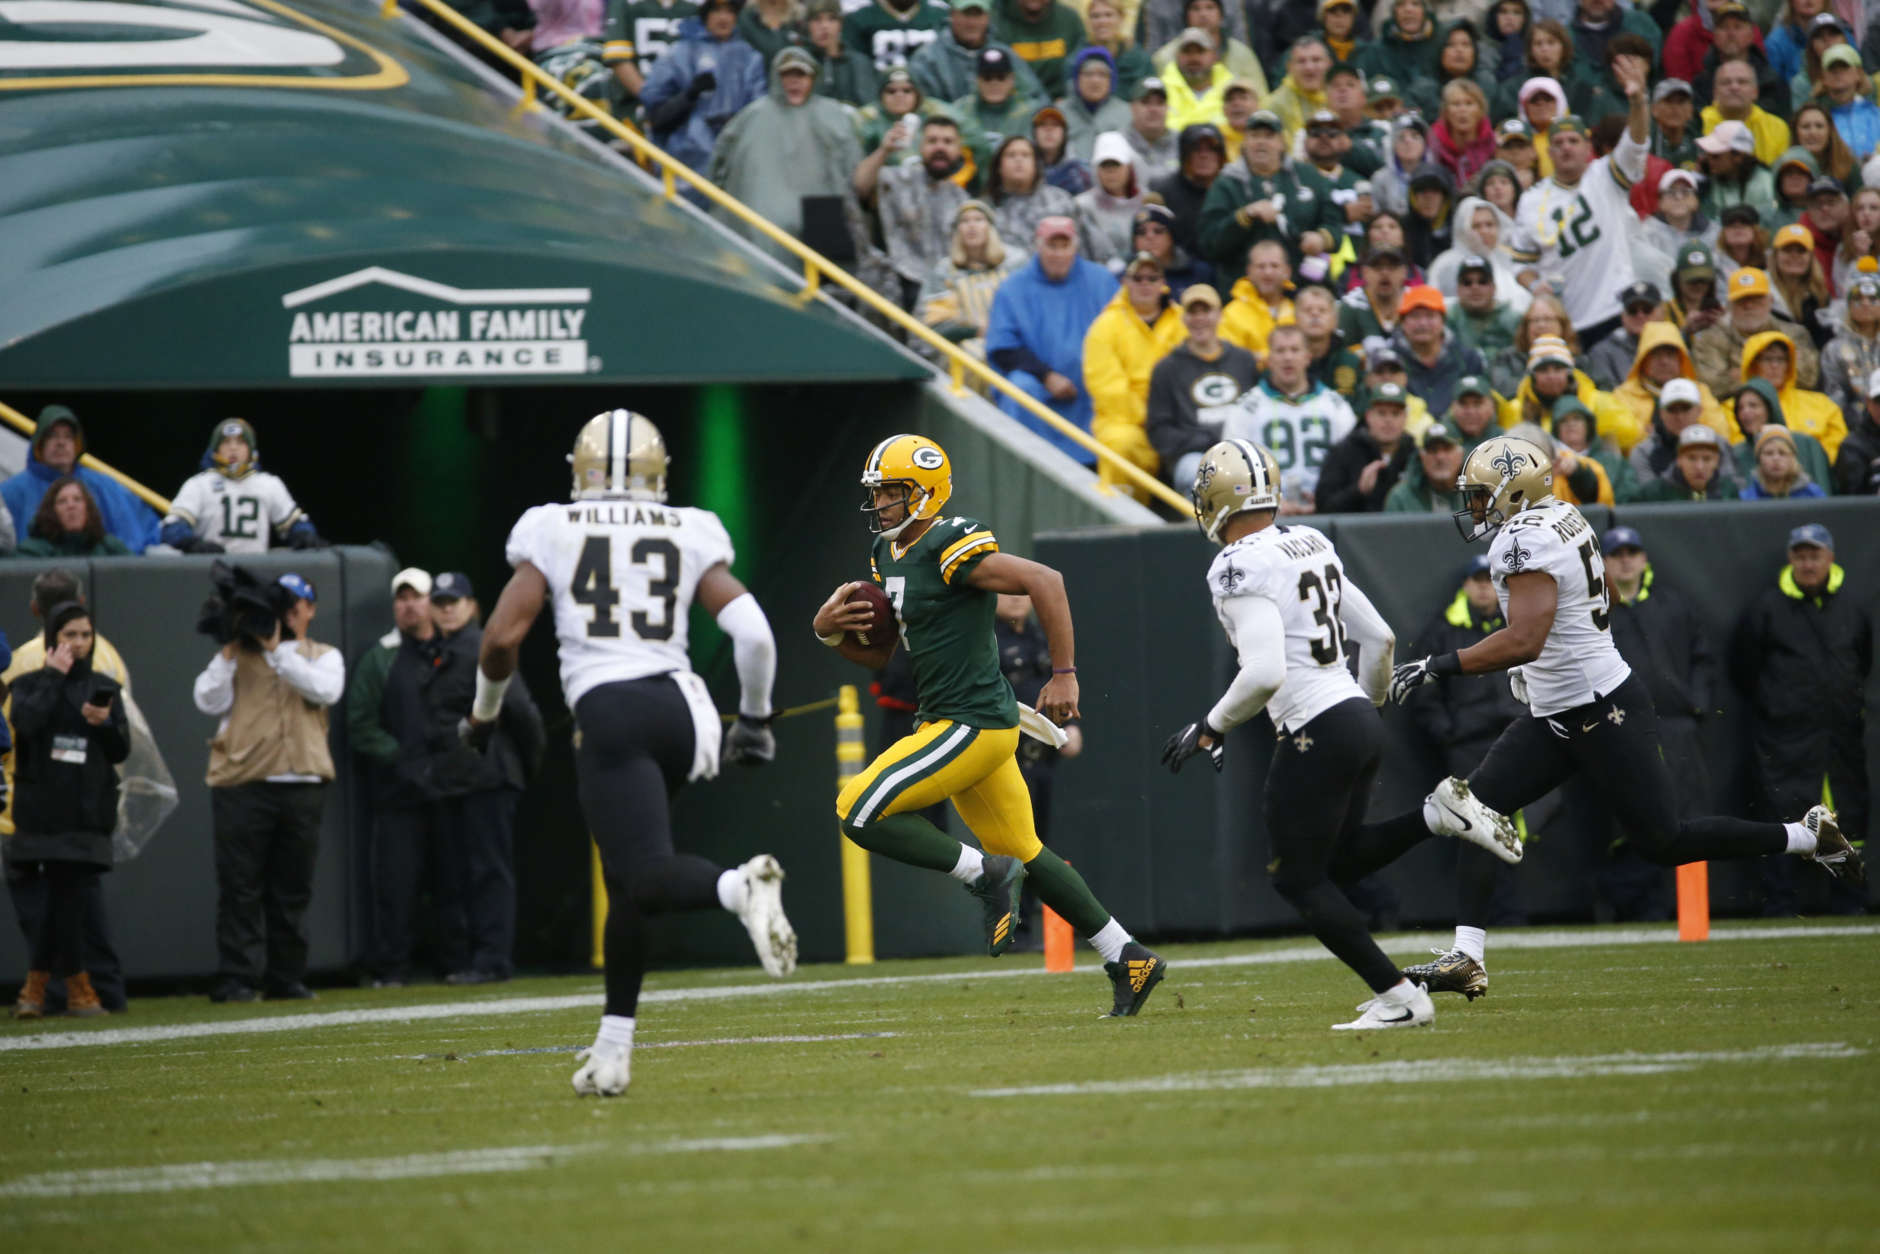 Green Bay Packers quarterback Brett Hundley (7) during the second half of an NFL football game against the New Orleans Saints, Sunday, Oct. 22, 2017, in Green Bay, Wis. (AP Photo/Mike Roemer)